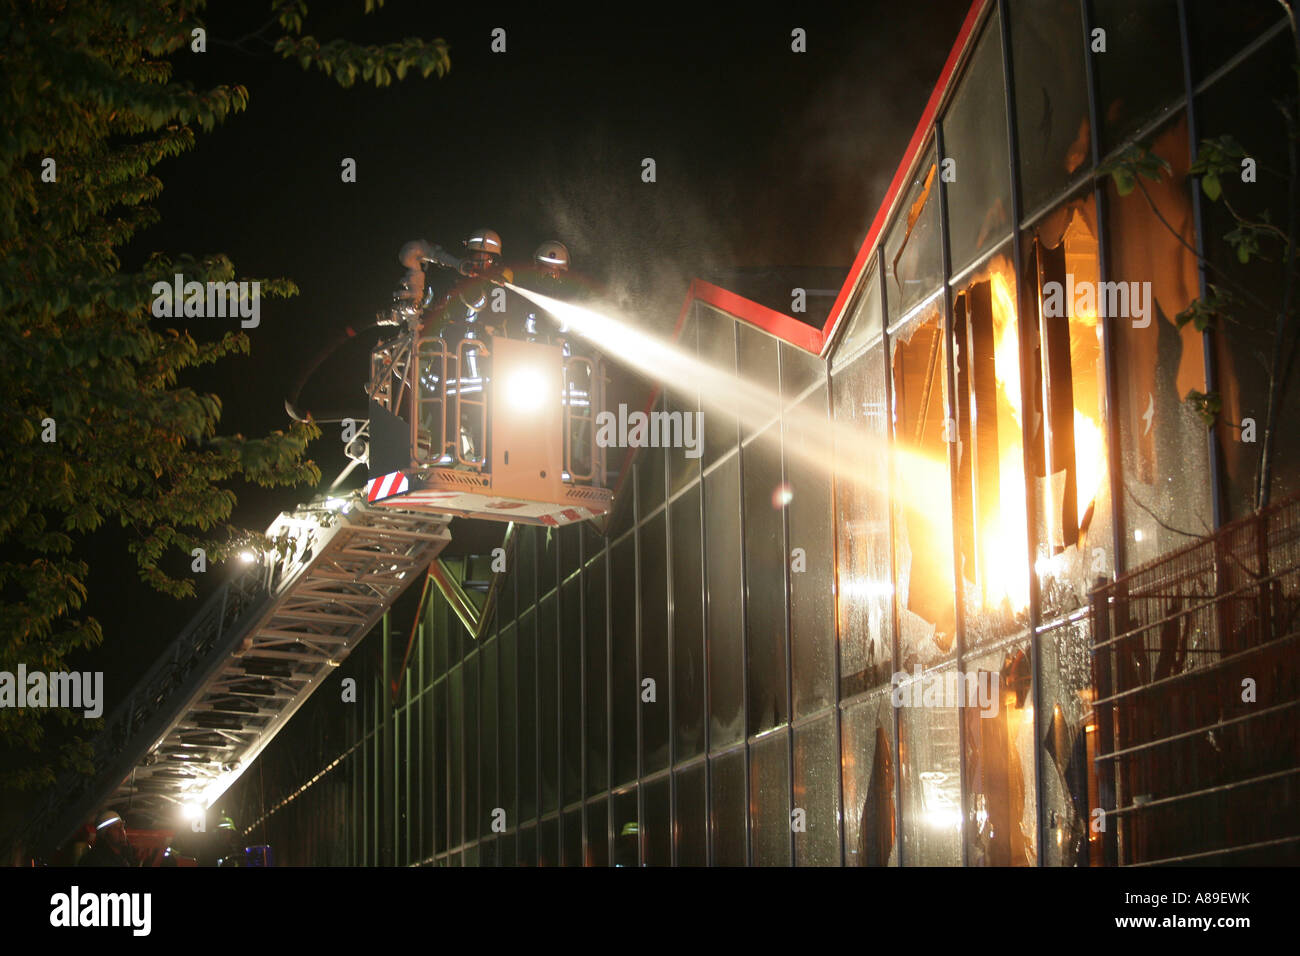 Firefighter put out the fire in an gardenmarket in Treis-Karden, Rhineland-Palatinate Germany Stock Photo